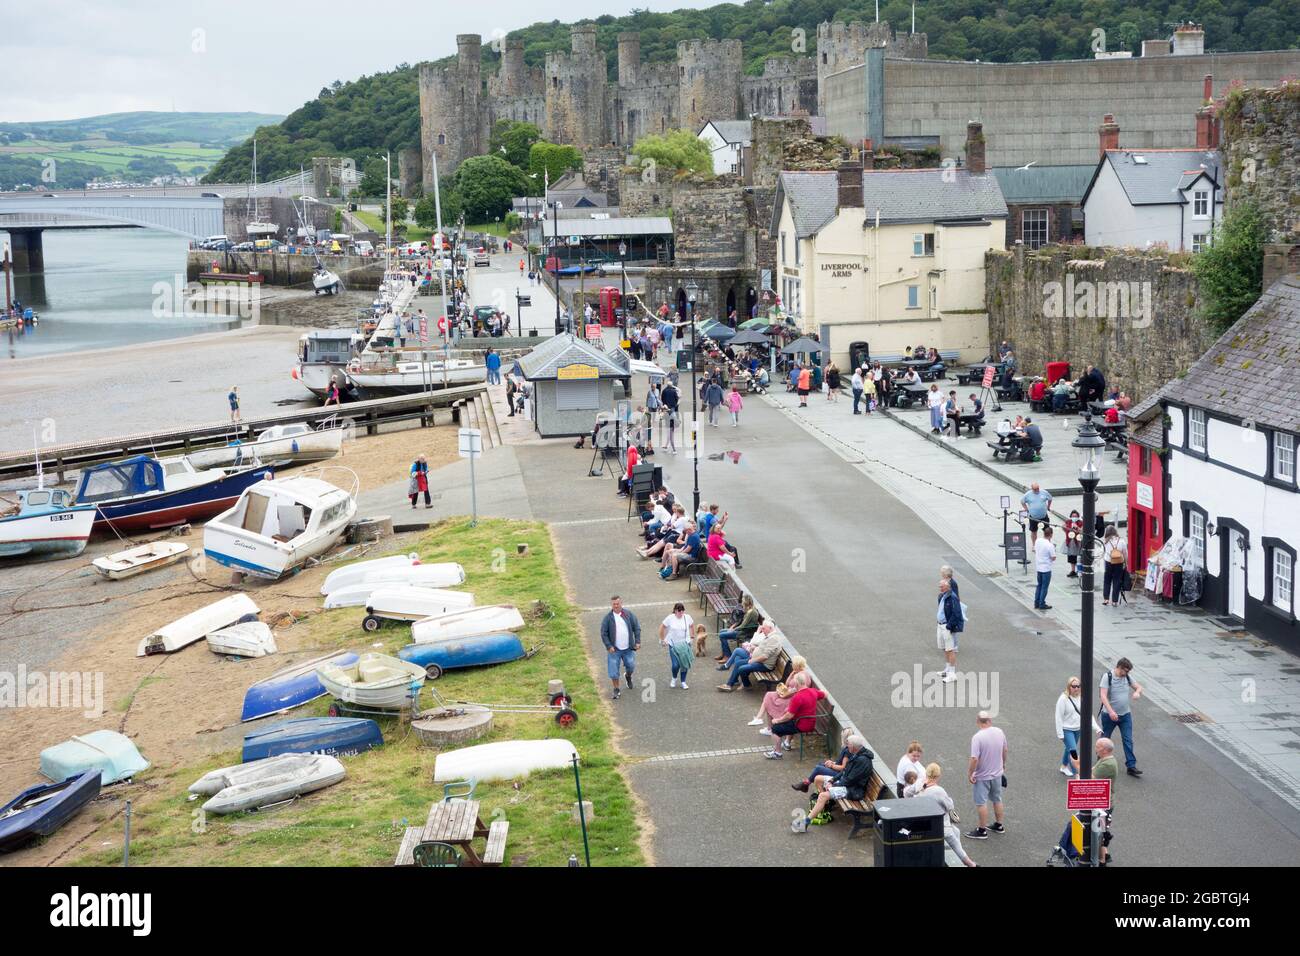 Conwy harbour in North Wales full of tourists with the castle in the background Stock Photo